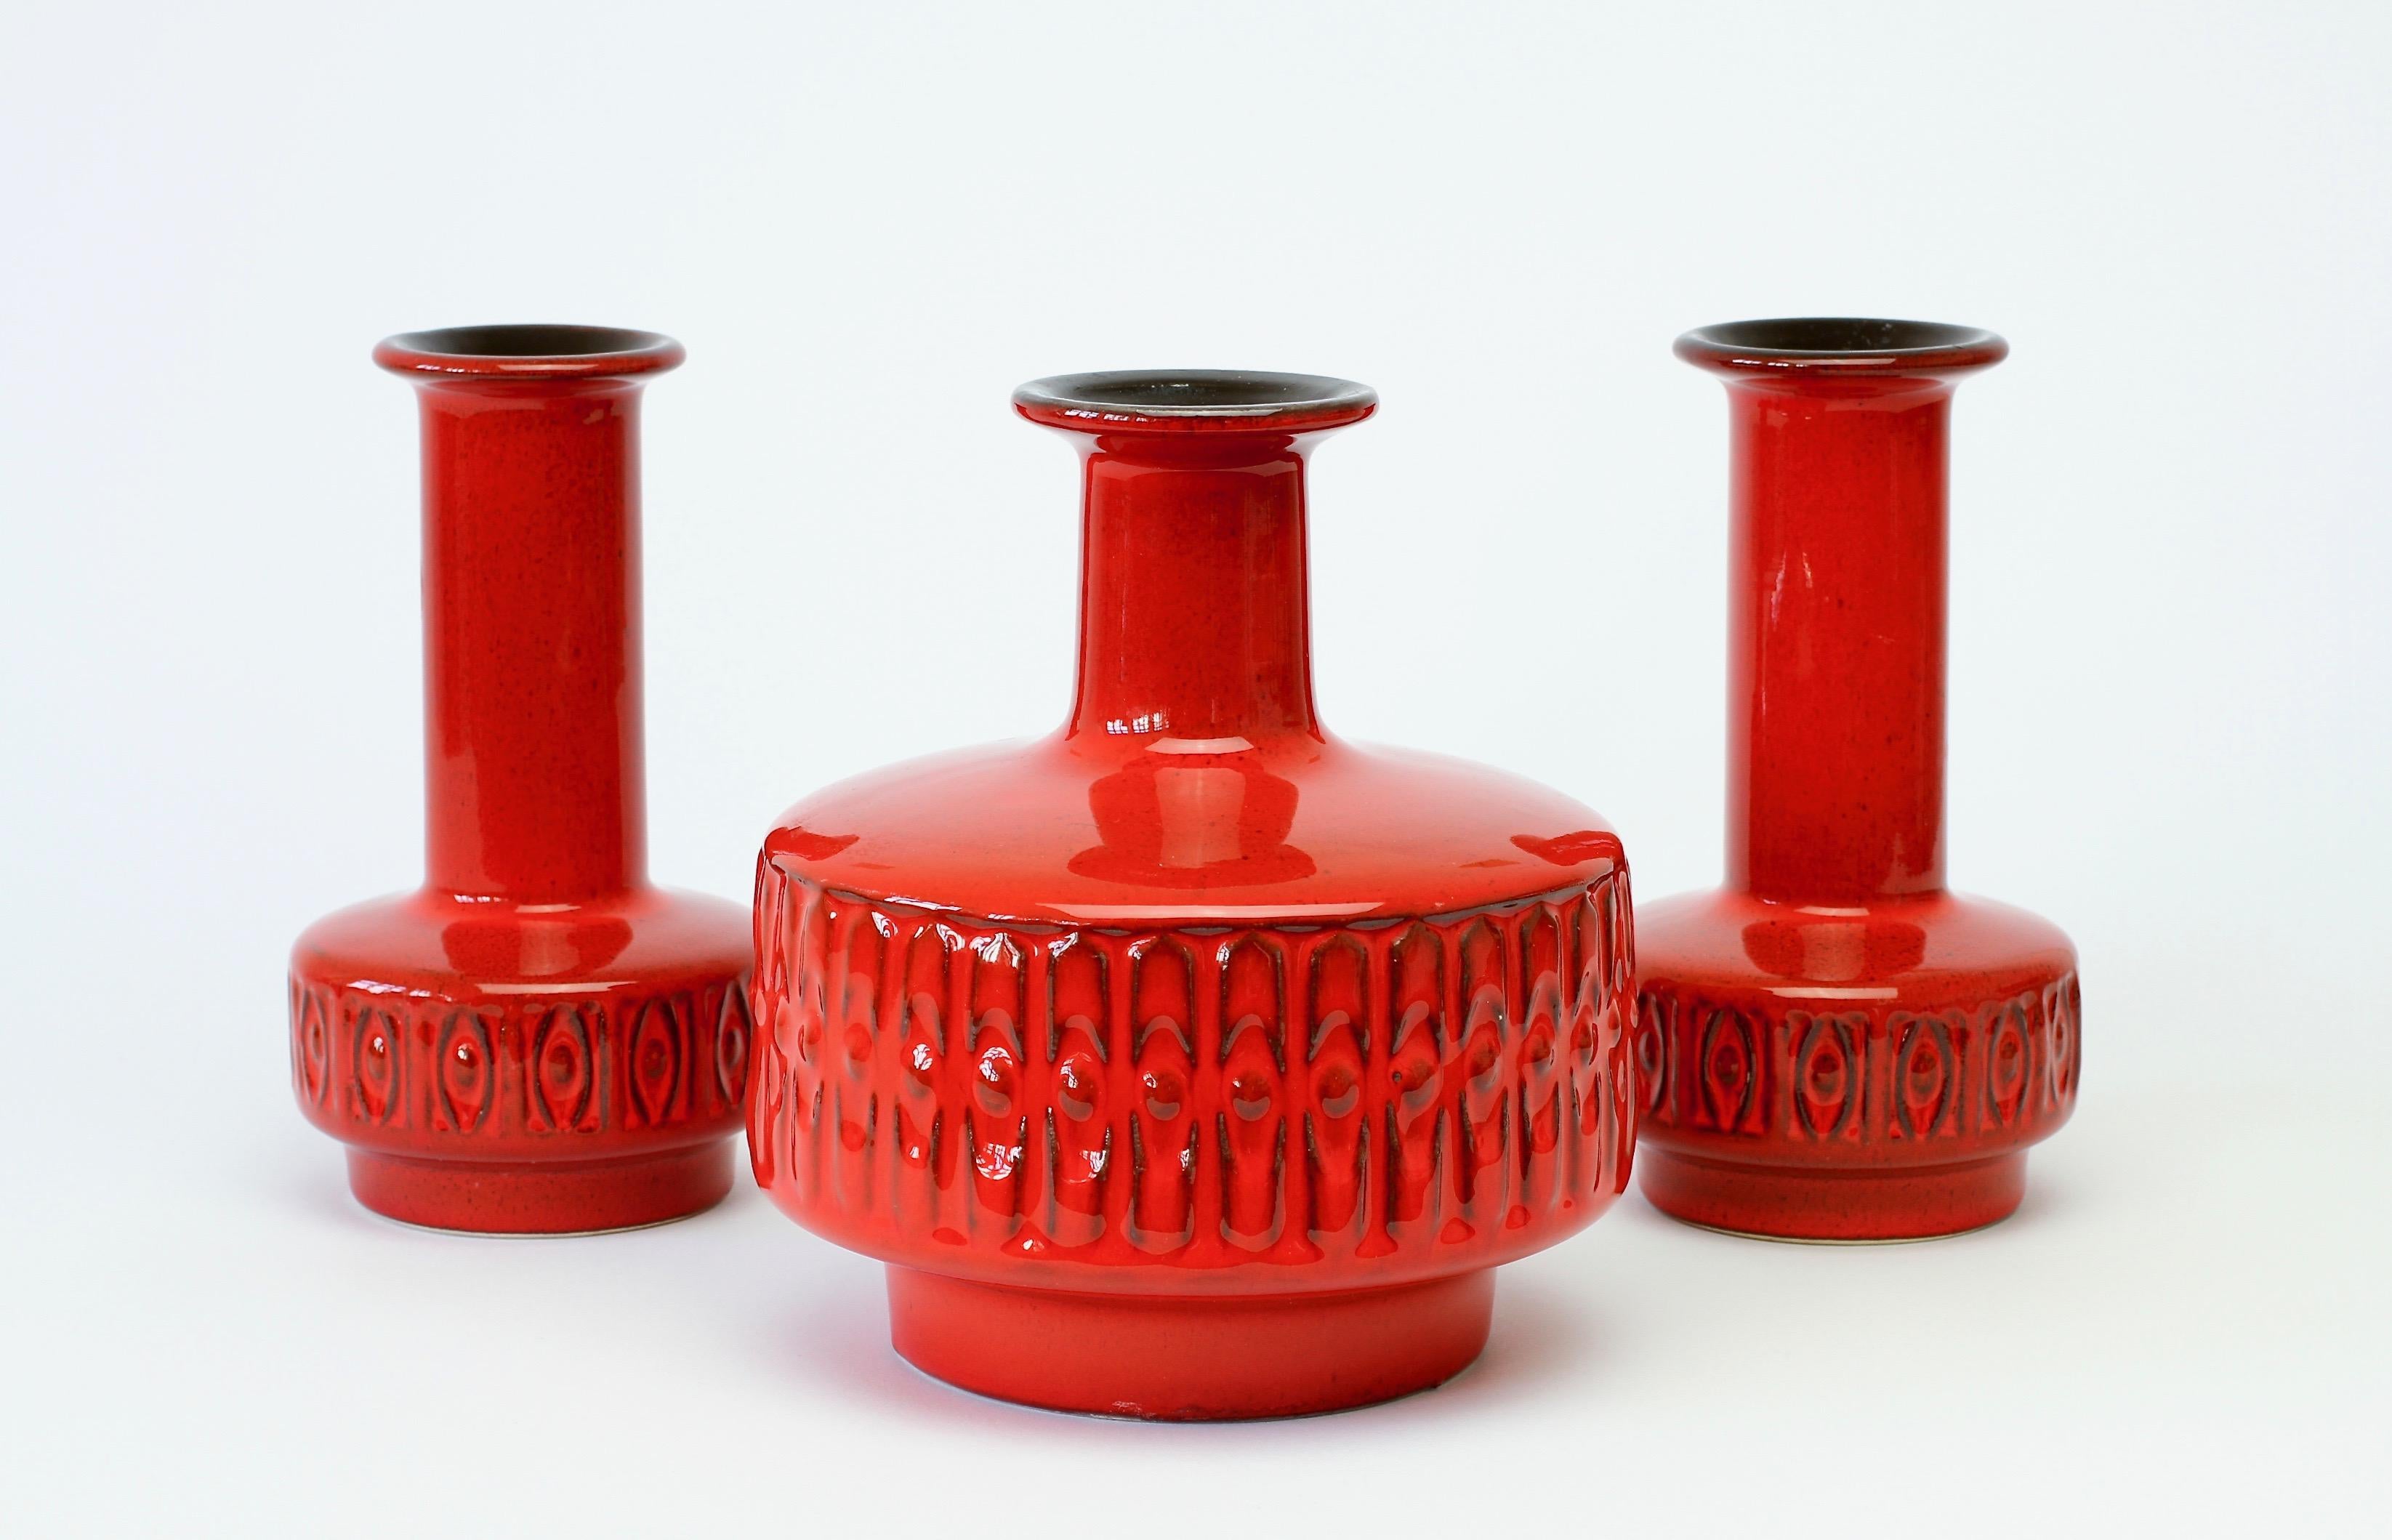 Trio of small vases by Fohr Pottery, Germany, circa 1970. The Company Fohr started producing decorative pottery in the 1950s under Wilhelm Fohr, although they were originally founded in 1859 by Peter Fohr. The vase with it's delightful form, bright